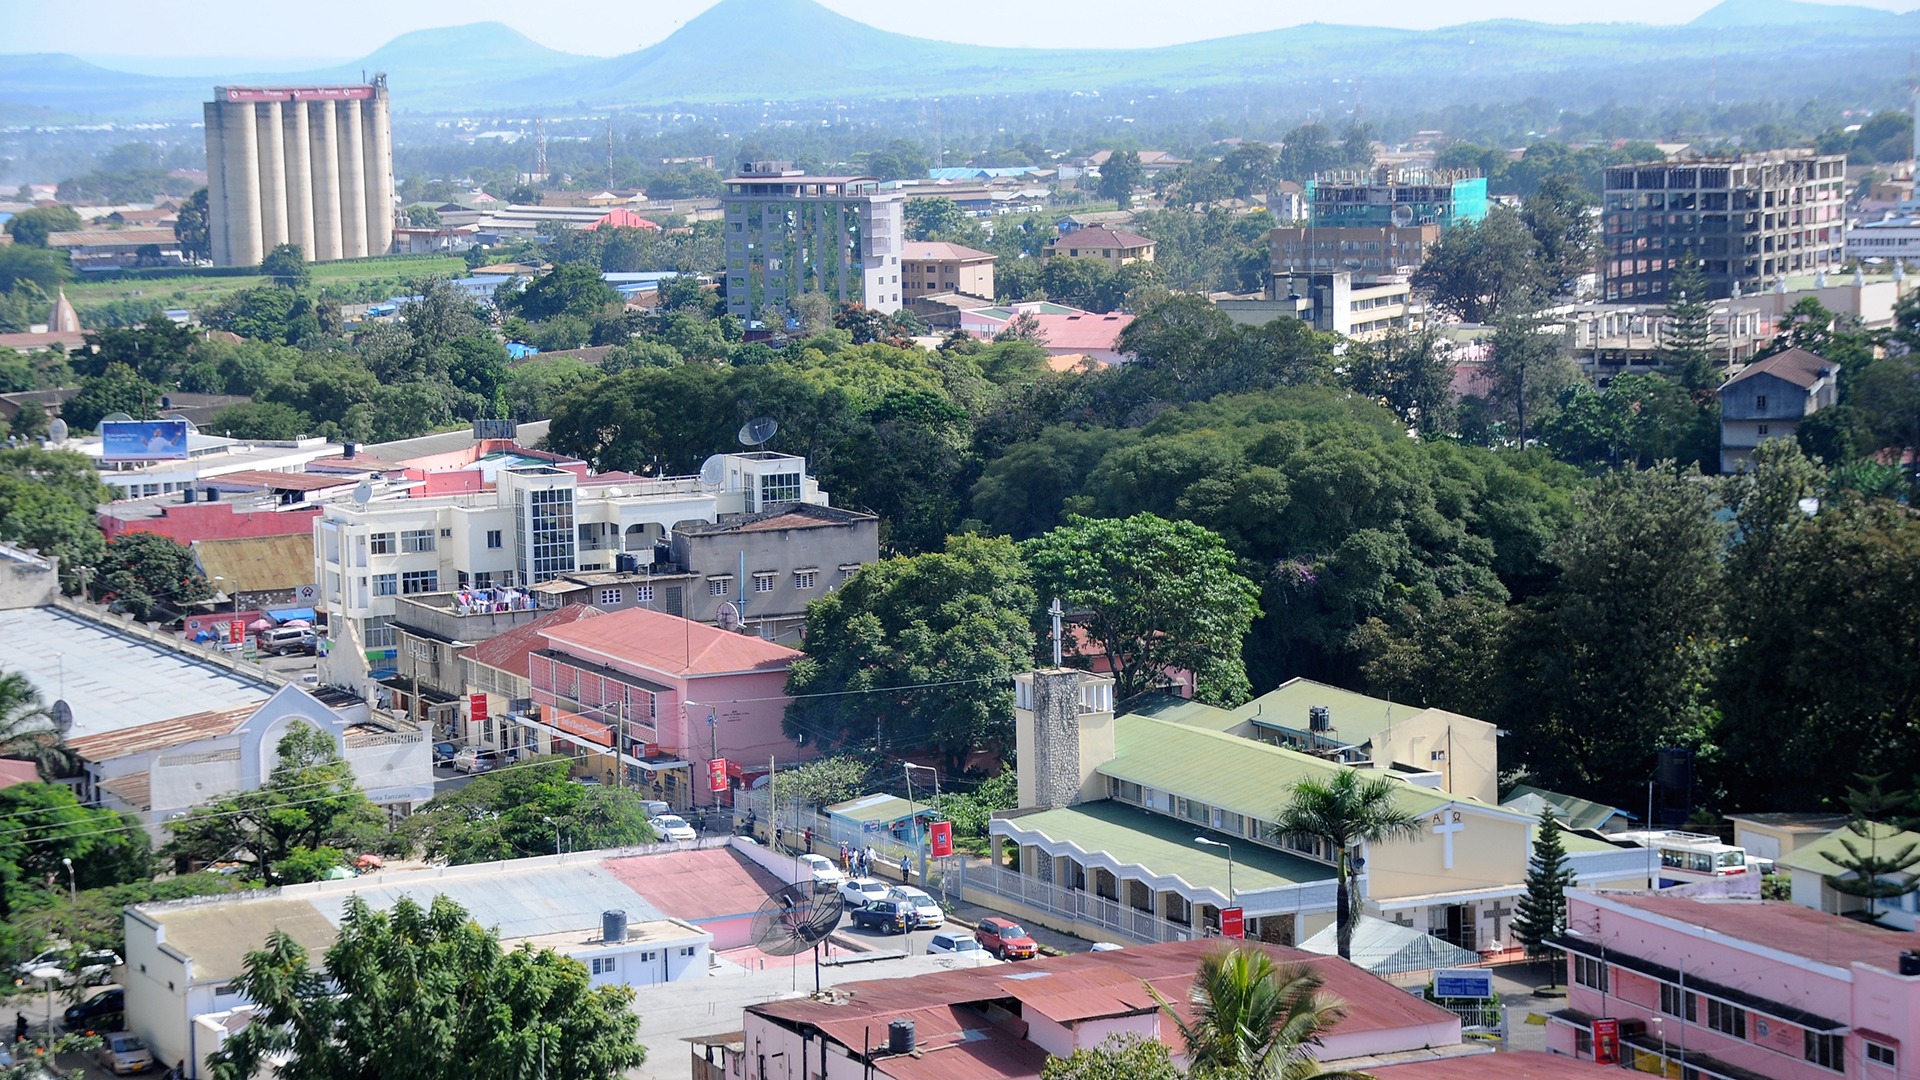 Arusha-Typical-city-scene-in-Arusha-showing-buildings-and-landmarks